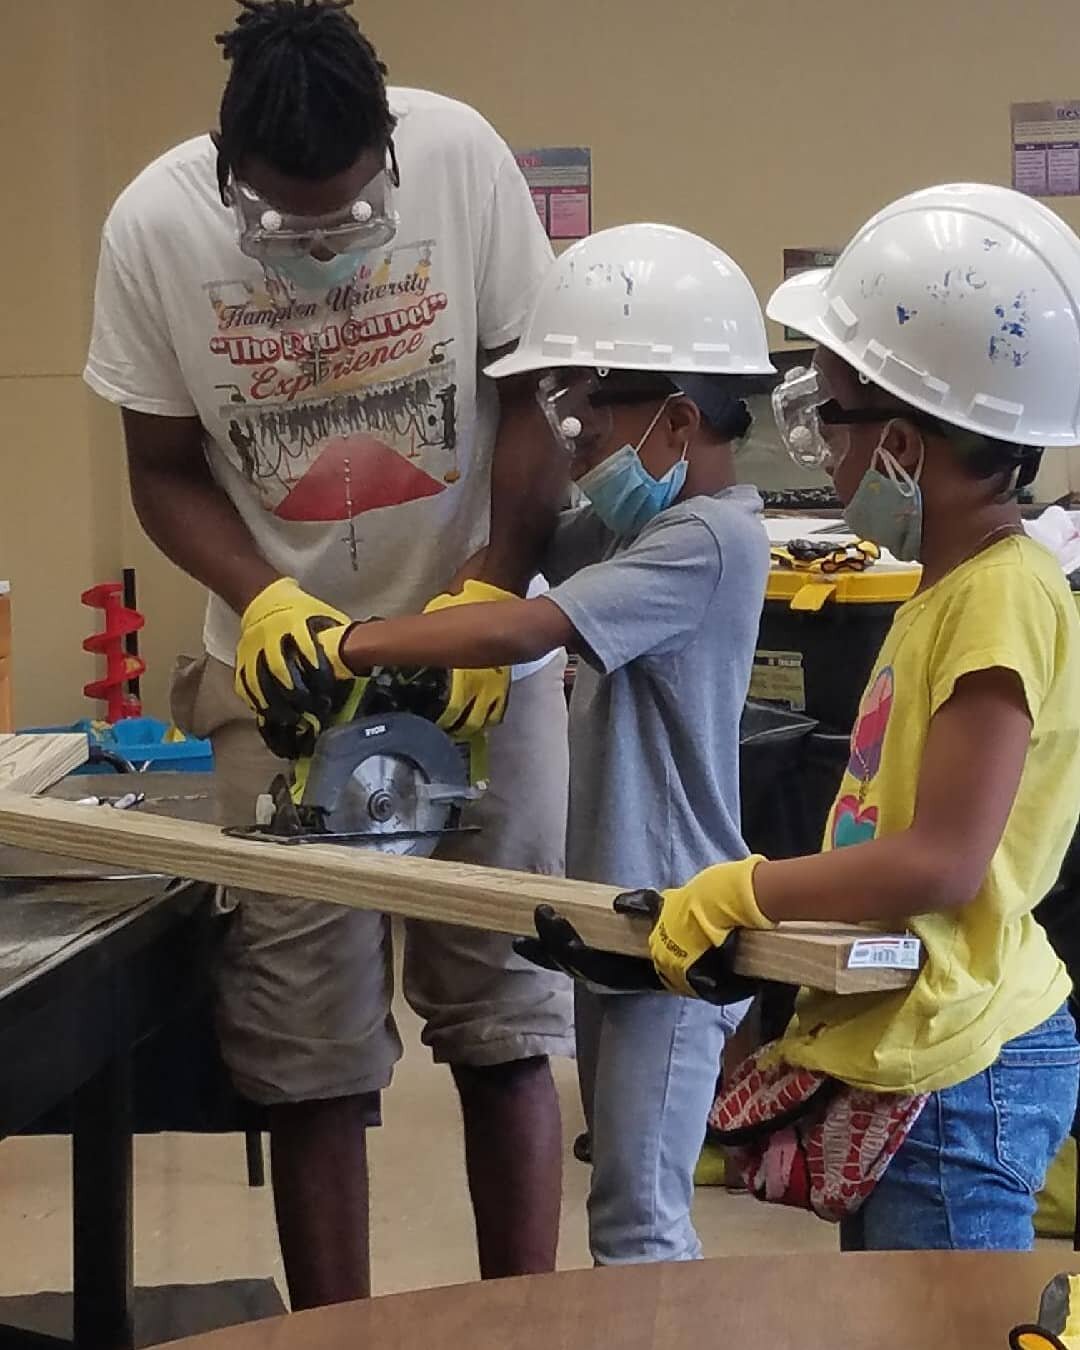 Building an obstacle course with grades 3rd through 8th at @mount_ararat_community_center!! 
.
#DraftingDreams 
#teachk12architecture 
#DraftingDreams5thYear
#Construction 
#Architecture
#education 
#SummerCamp